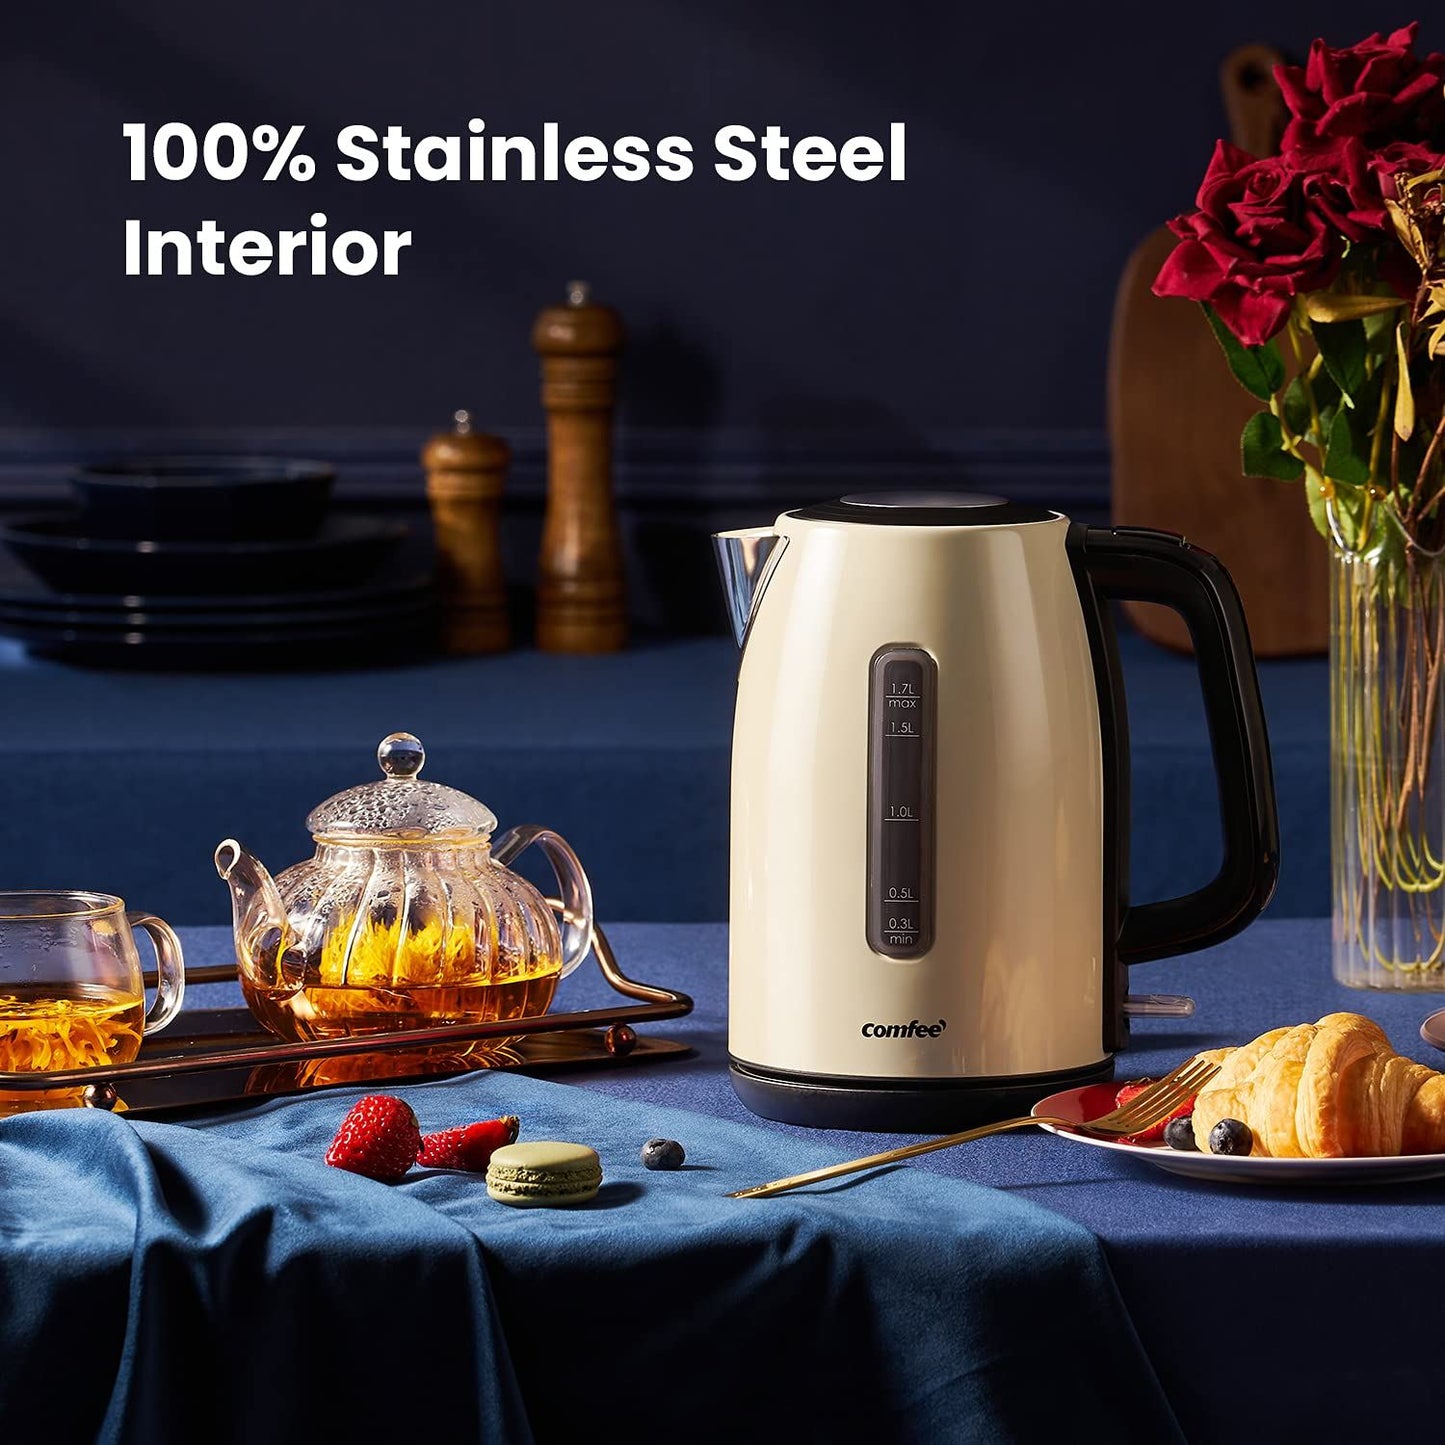 COMFEE' Electric 1.7L Brushed Stainless Steel Kettle